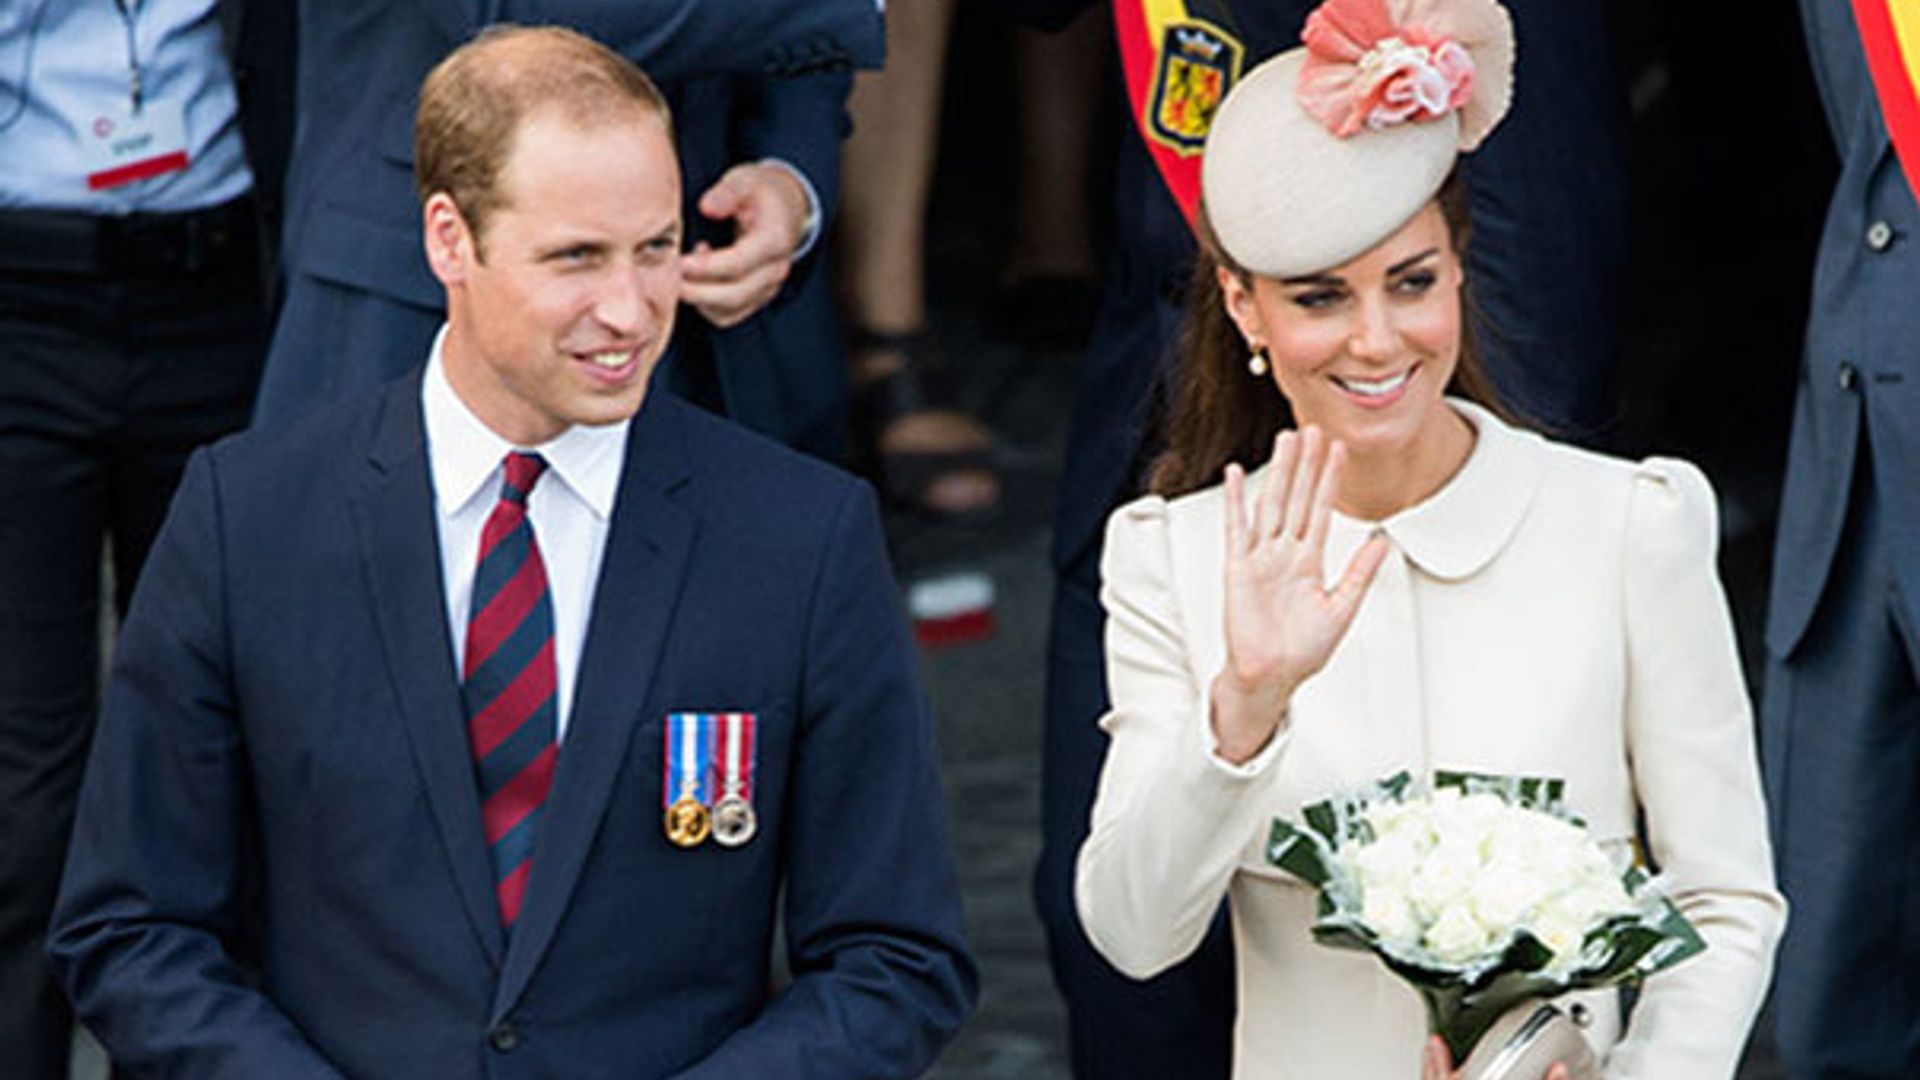 Prince William and Duchess Kate to visit Wales this weekend